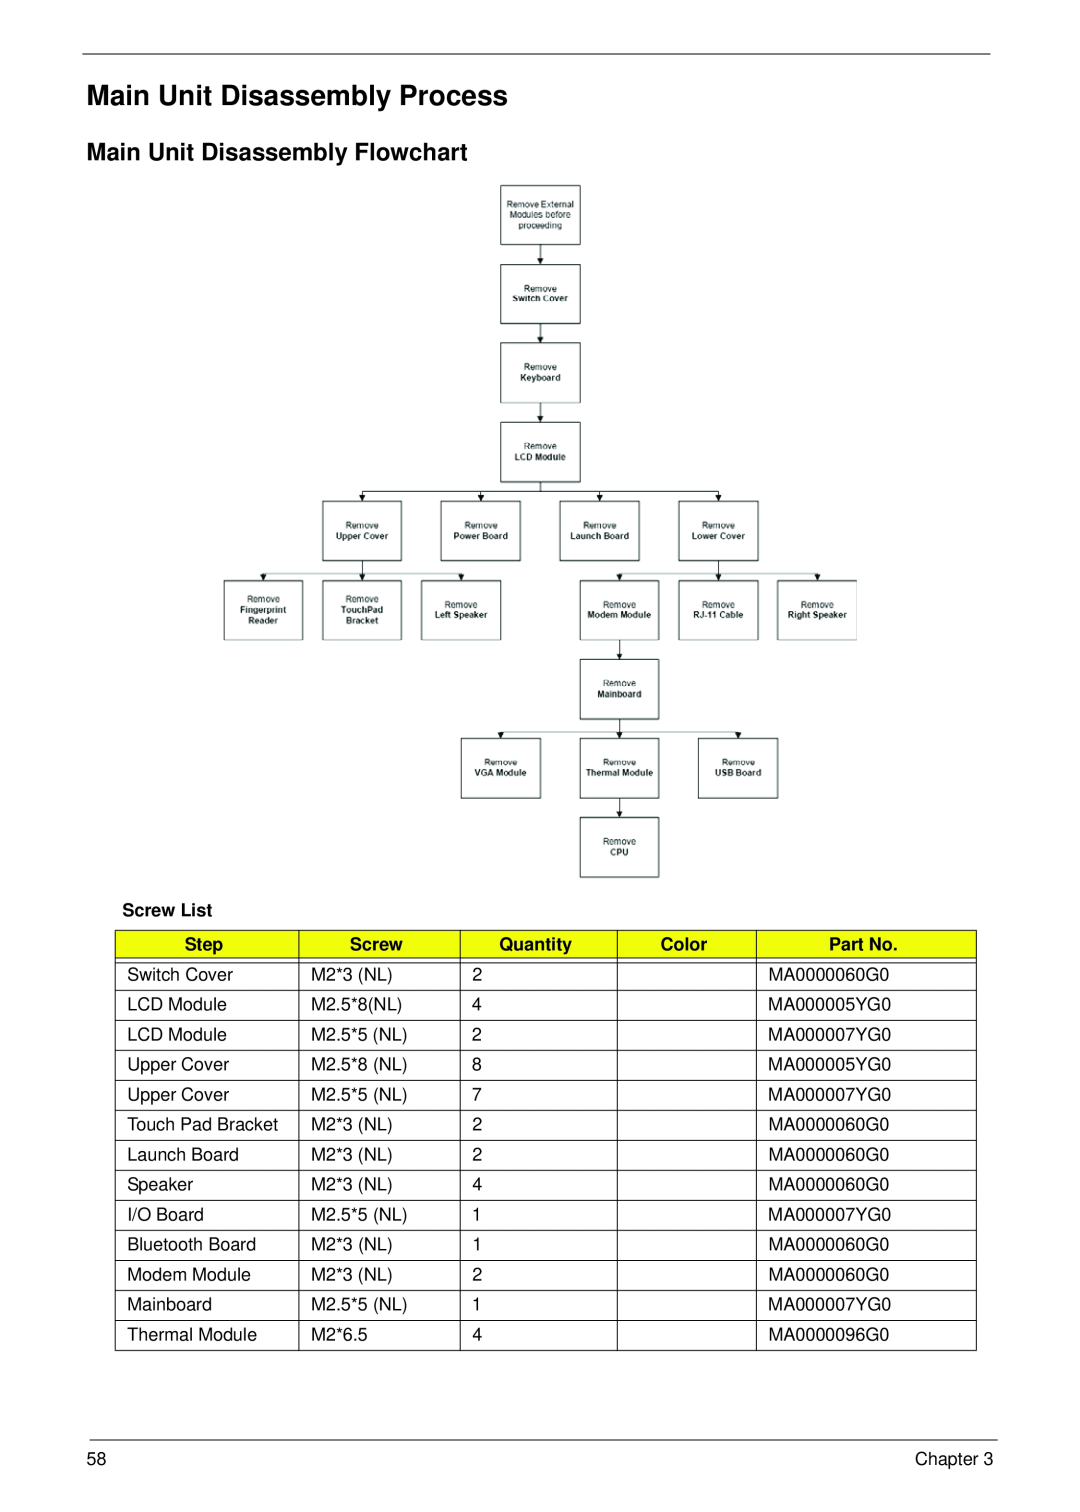 Acer 4730 manual Main Unit Disassembly Process, Main Unit Disassembly Flowchart 